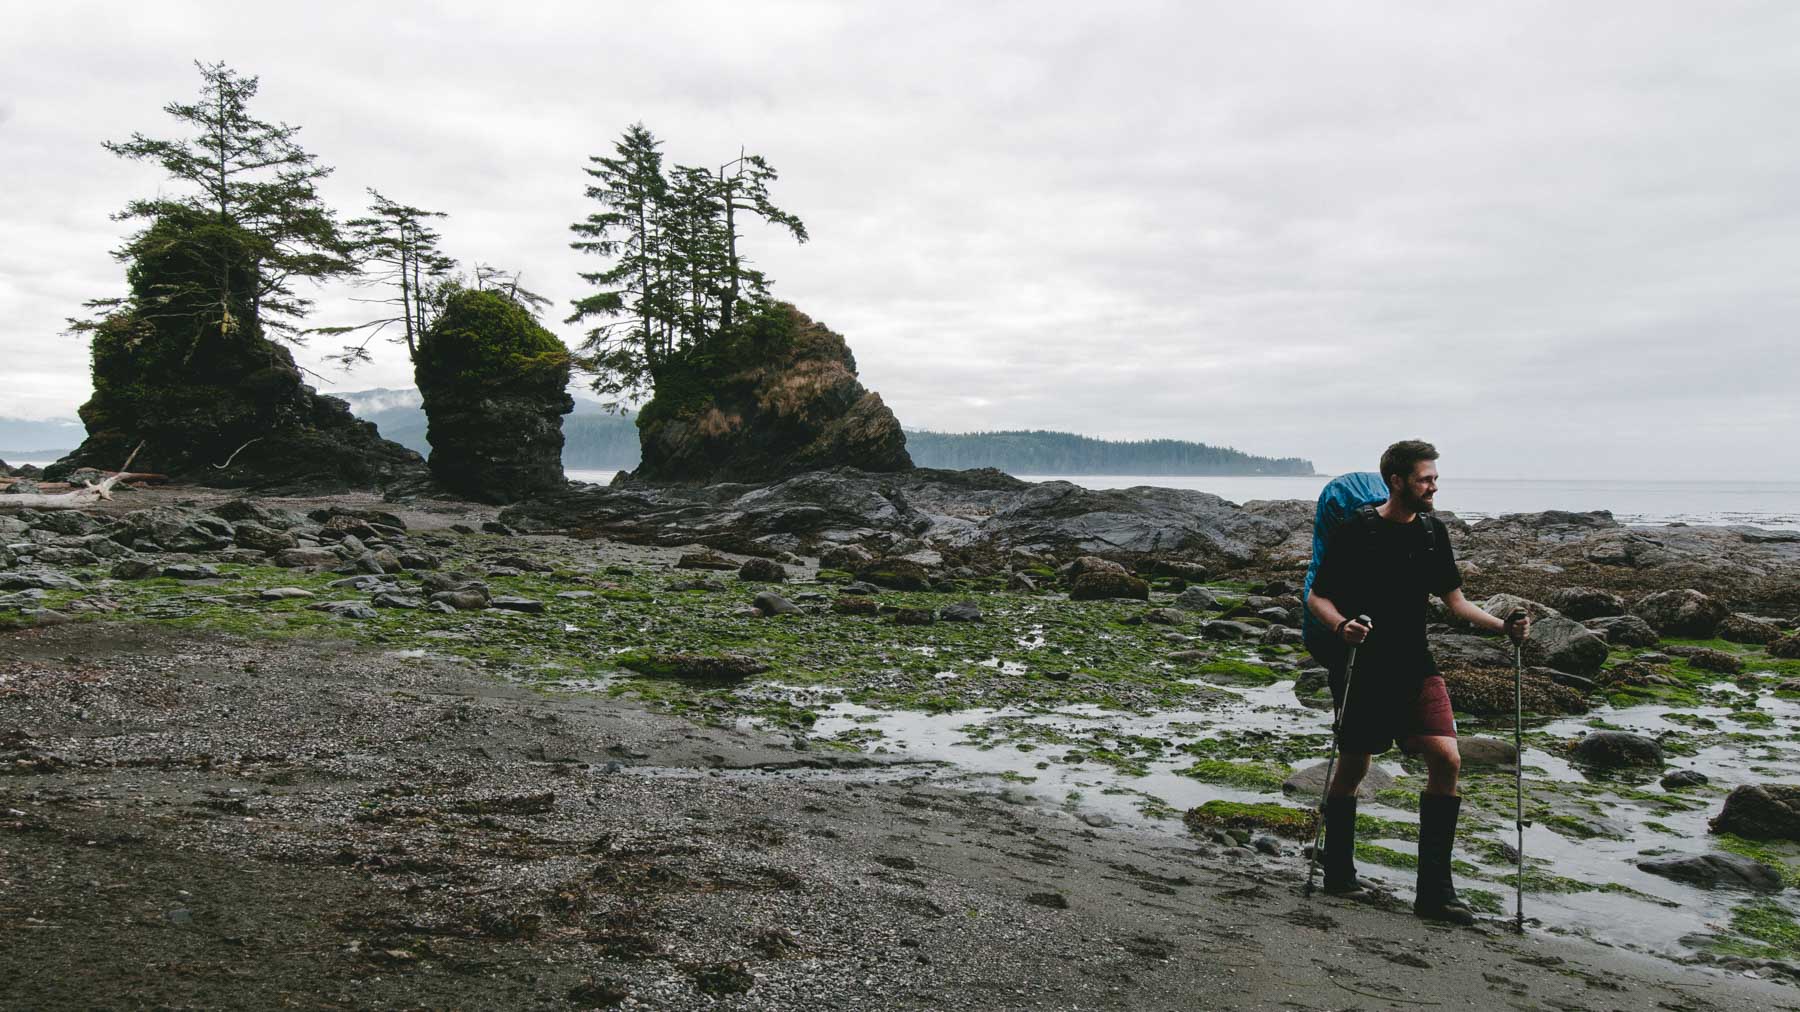 Hiking the rugged west coast of Vancouver Island